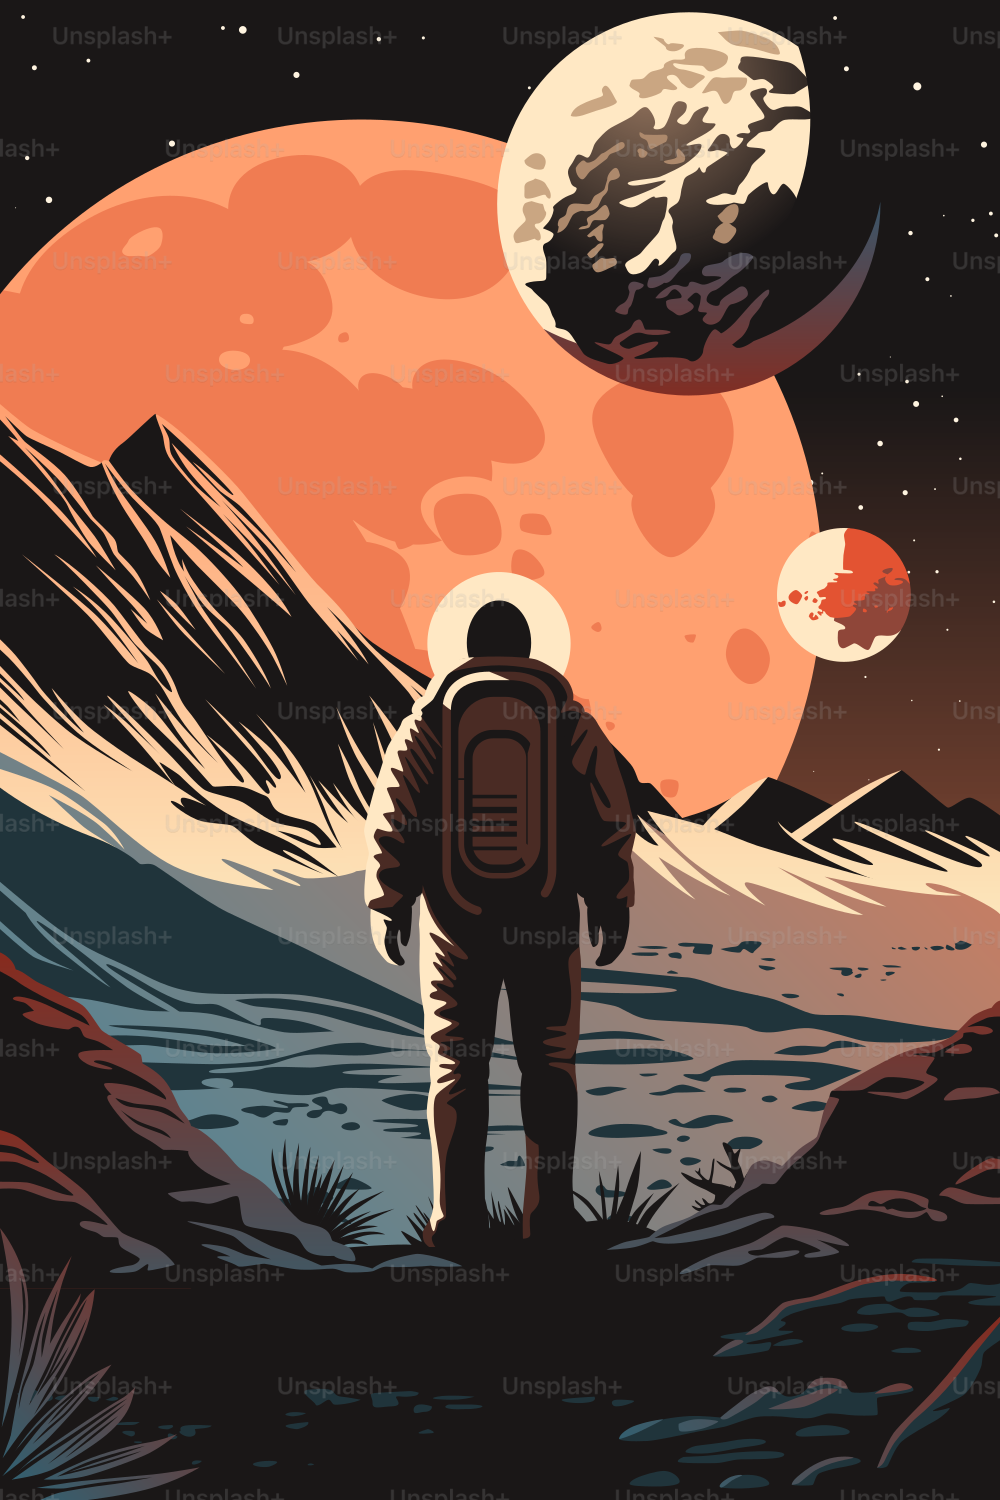 Human Space Colonization Poster. Astronaut on the Surface of Newly Discovered Planet Looking at Skies with Unfamiliar Moons and Asteroids.